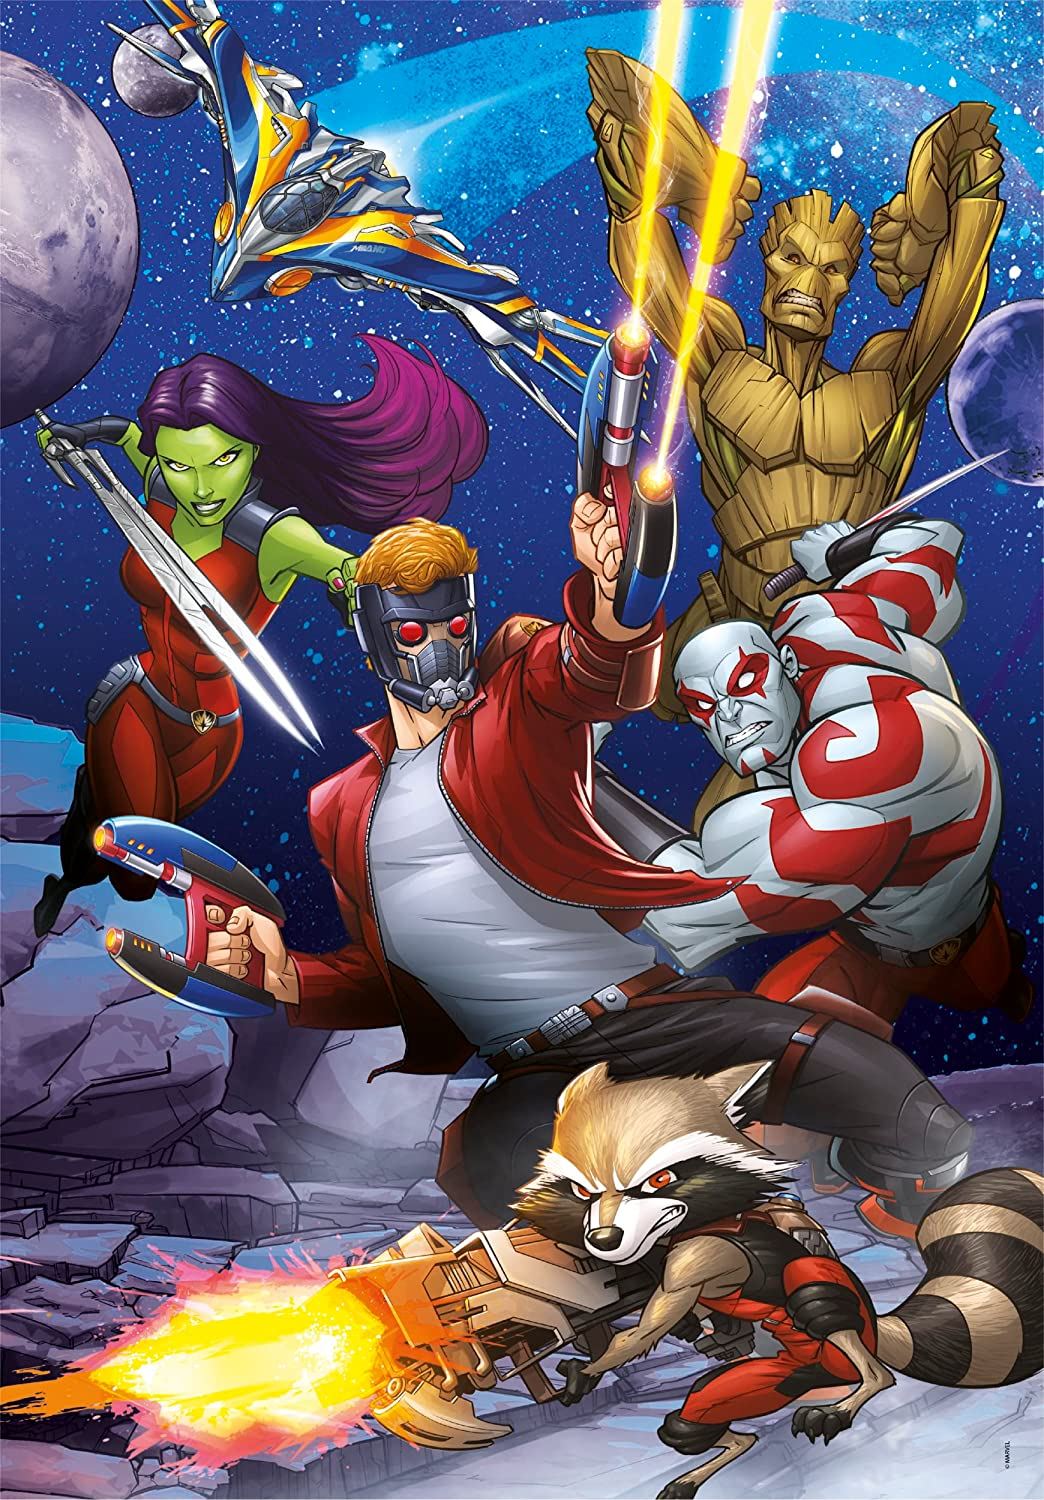 Marvel Guardians of the Galaxy Jigsaw Puzzle 180 Pieces